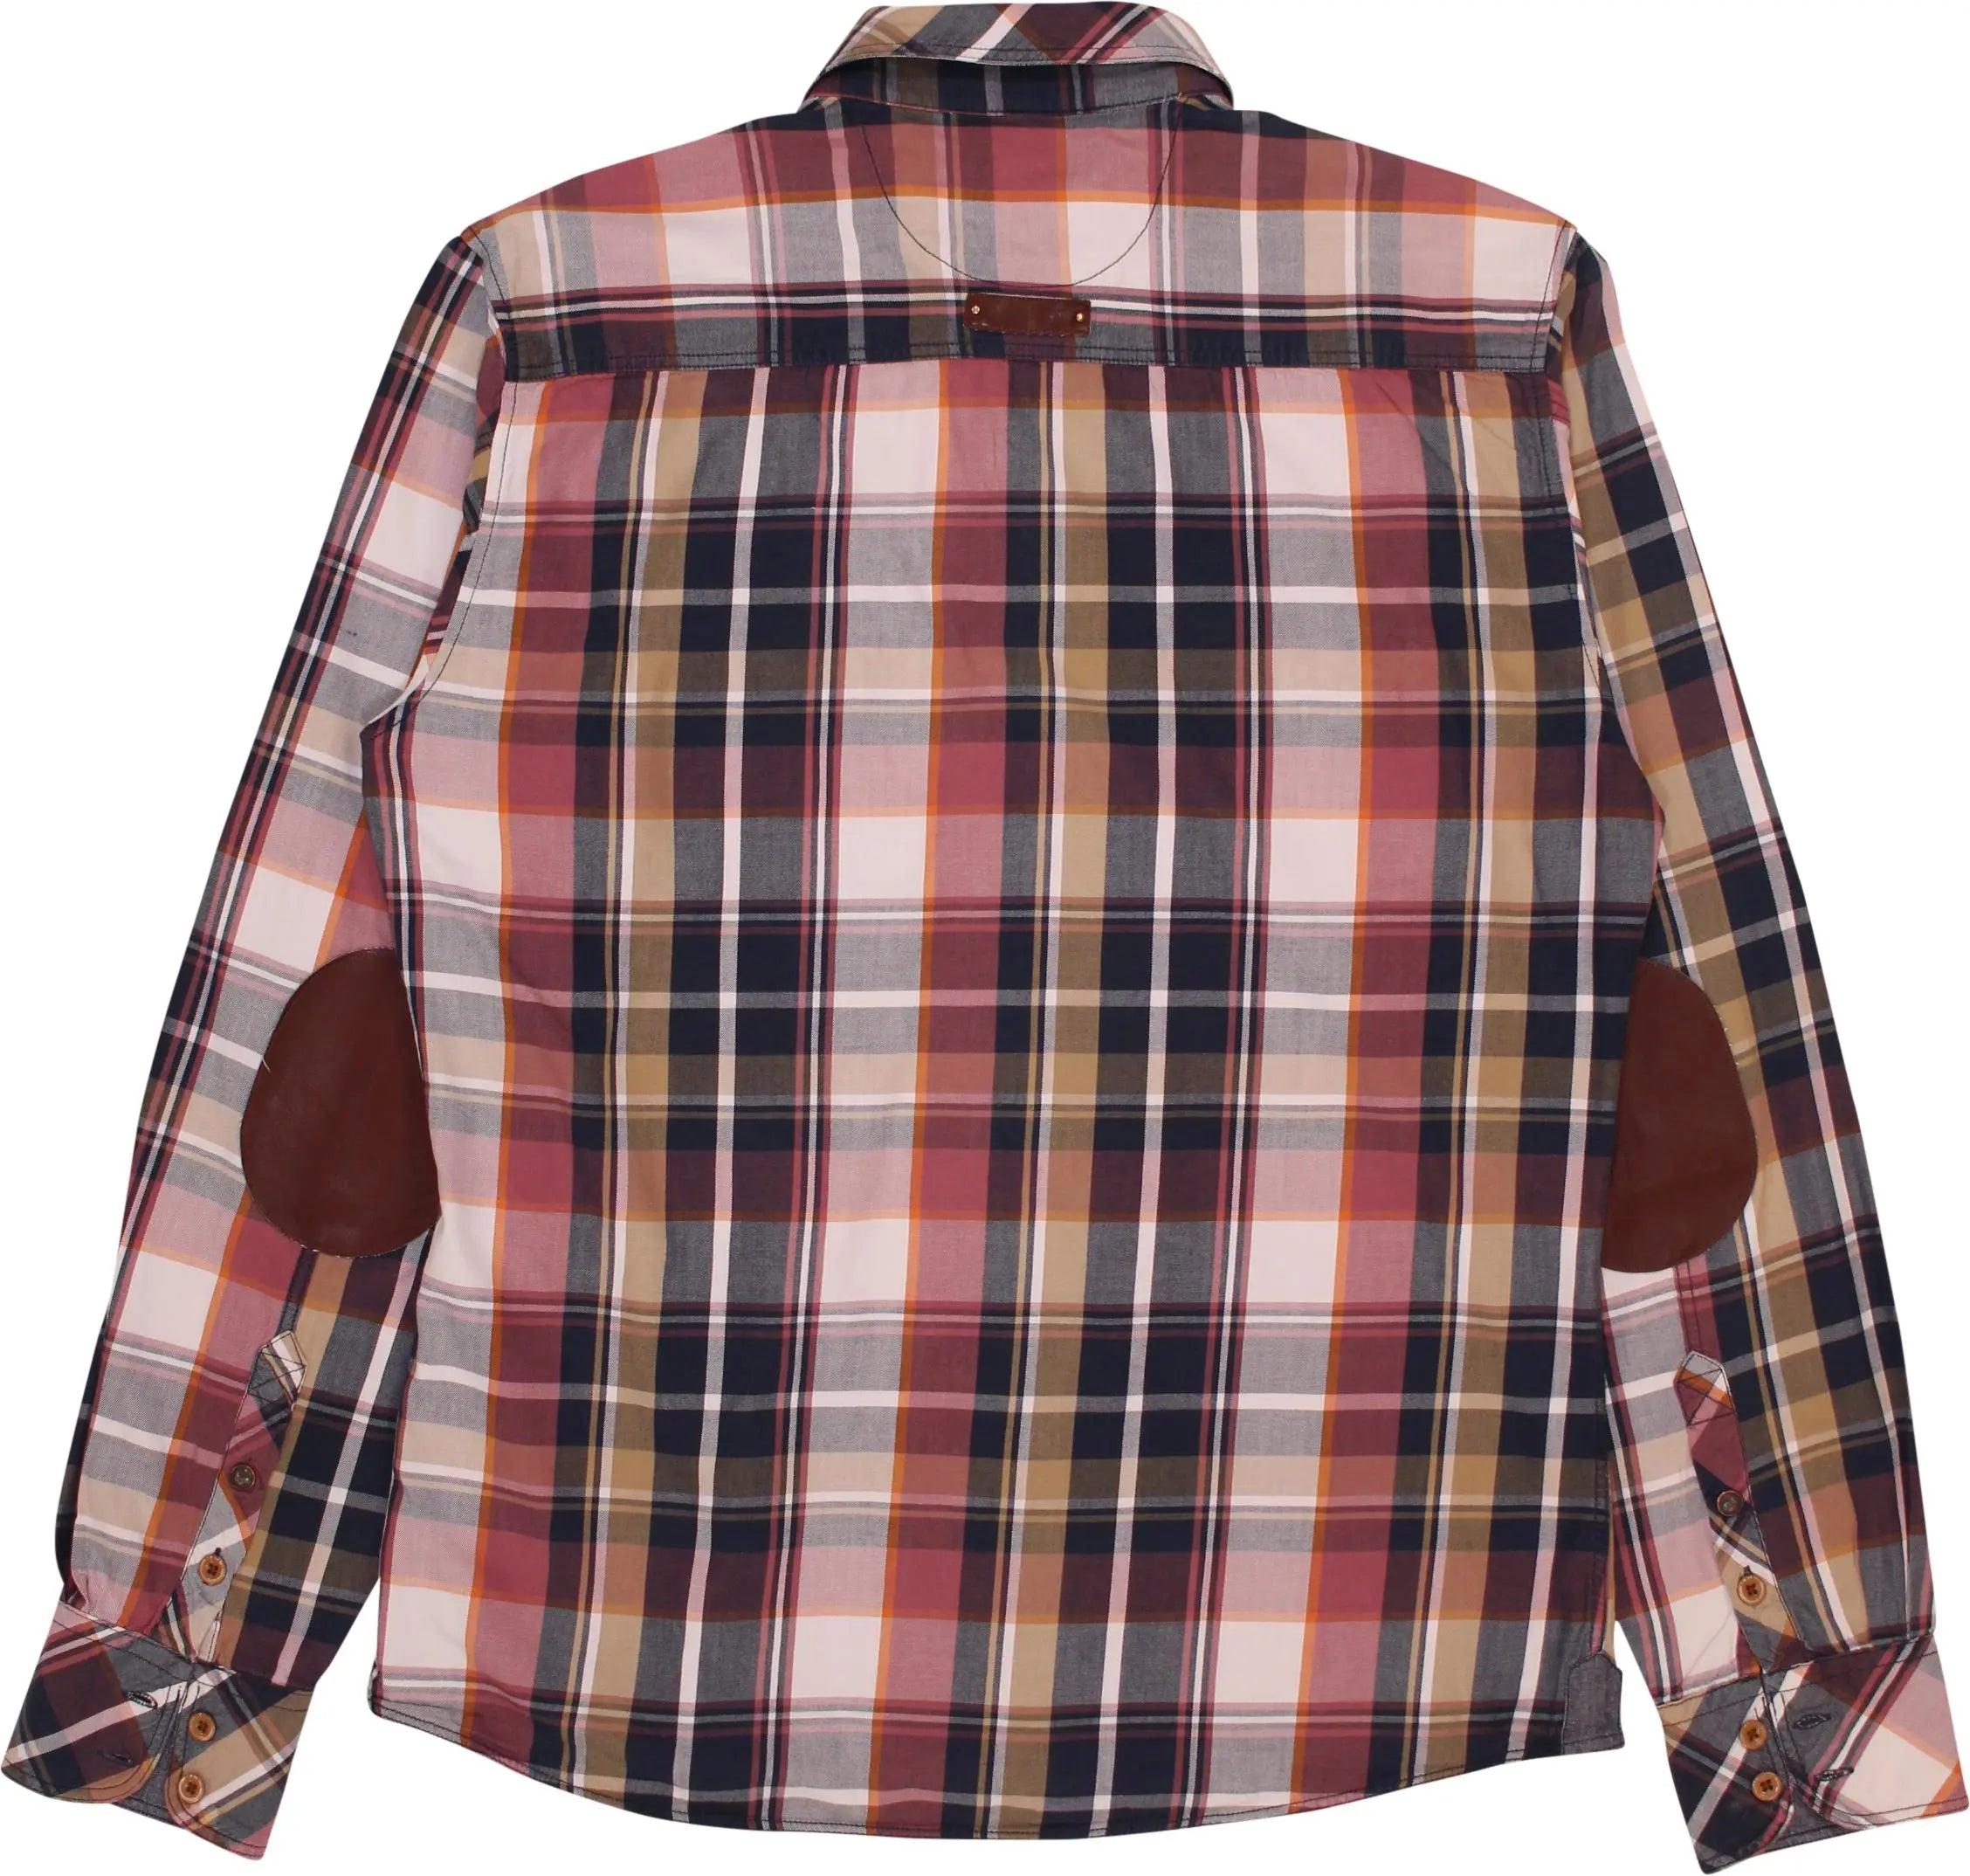 Rugged Wear Clothing LTD. - Checked Shirt- ThriftTale.com - Vintage and second handclothing